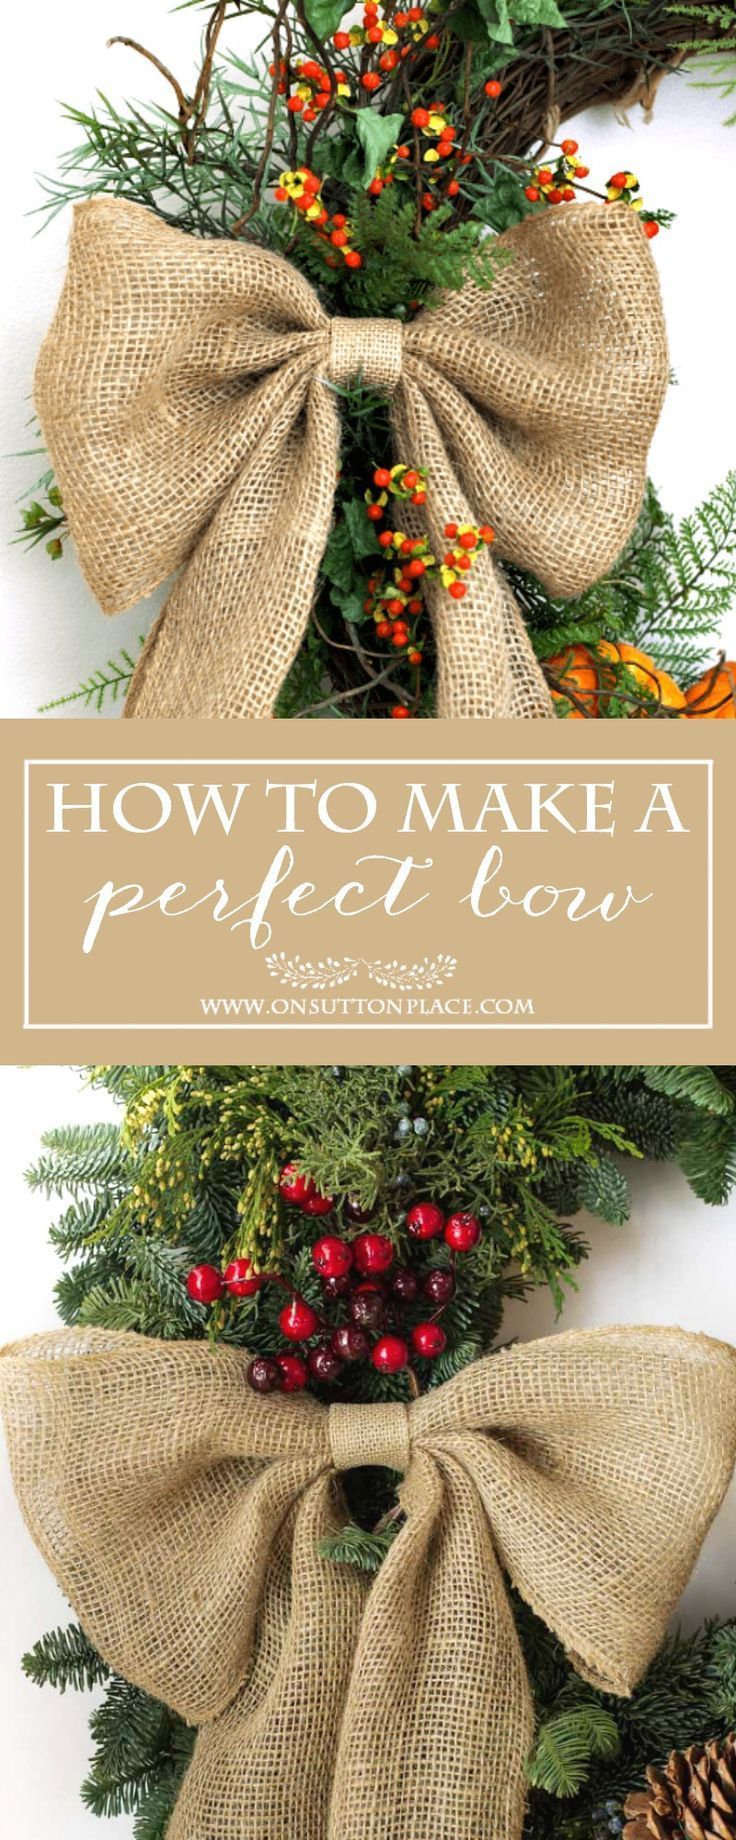 How to Make a Perfect Burlap Bow | Easy tutorial to make a perfect bow every time.